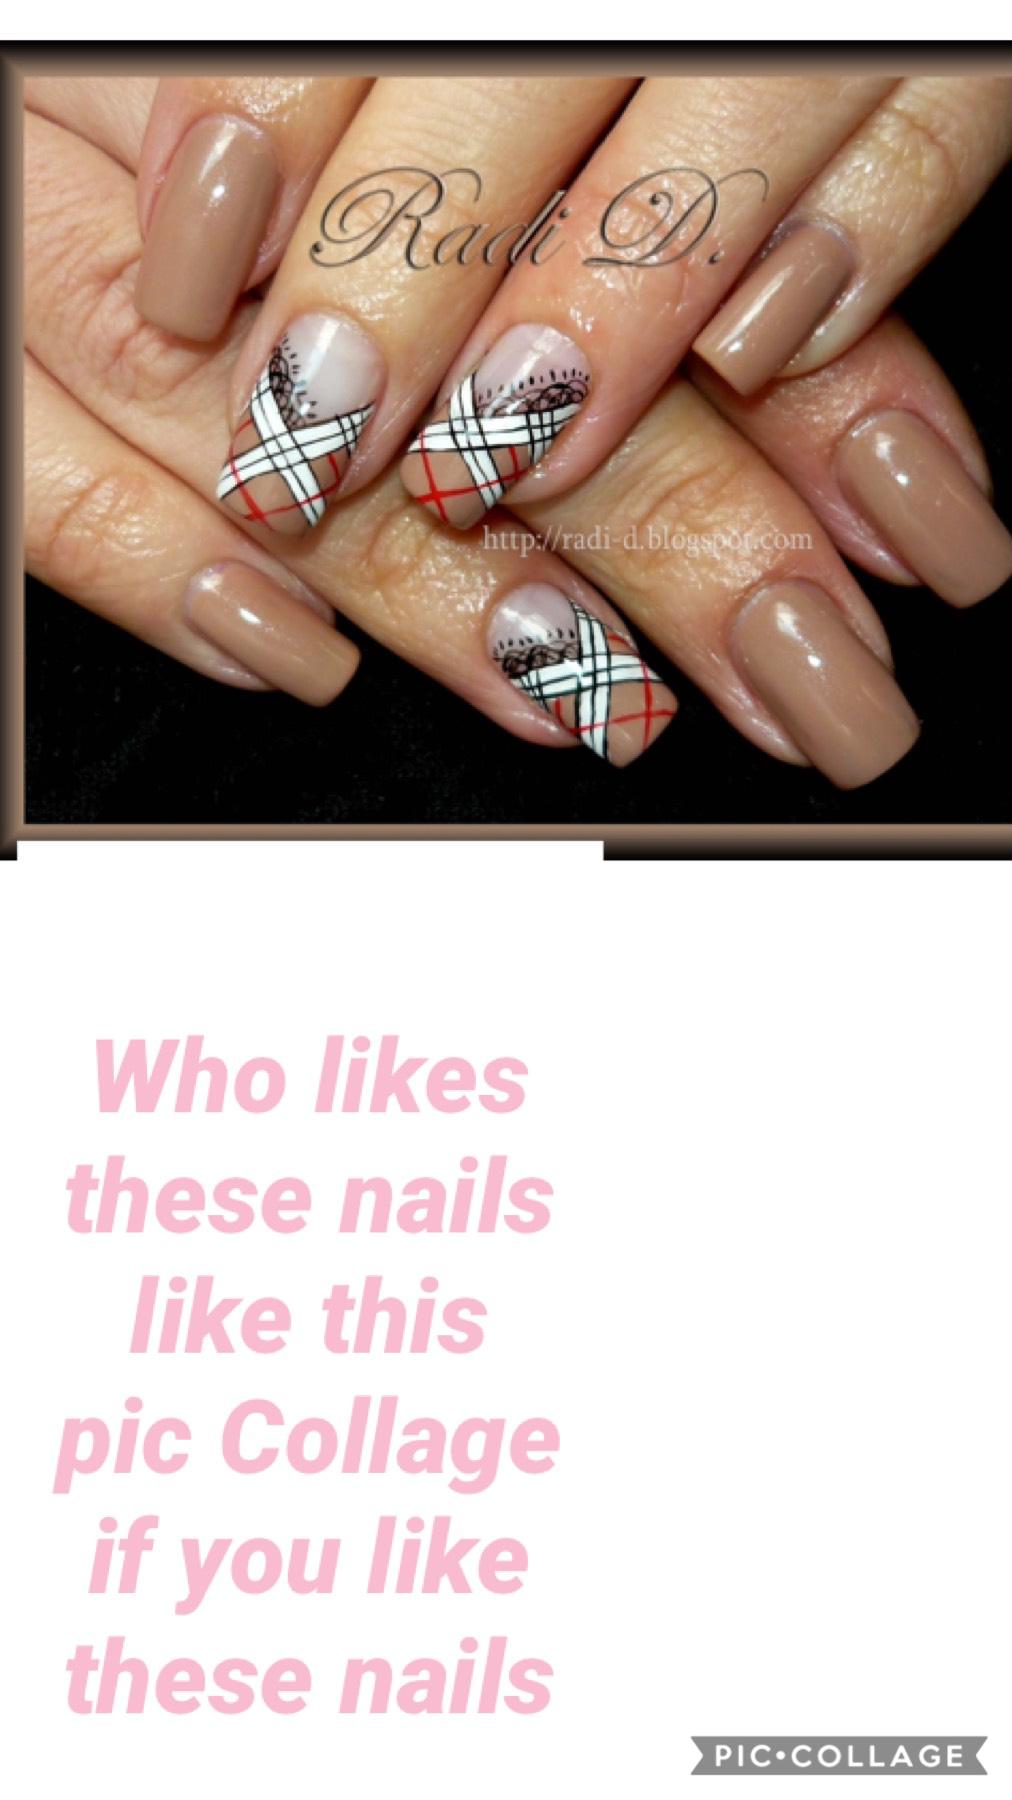 Like this Pic Collage if you like these nails